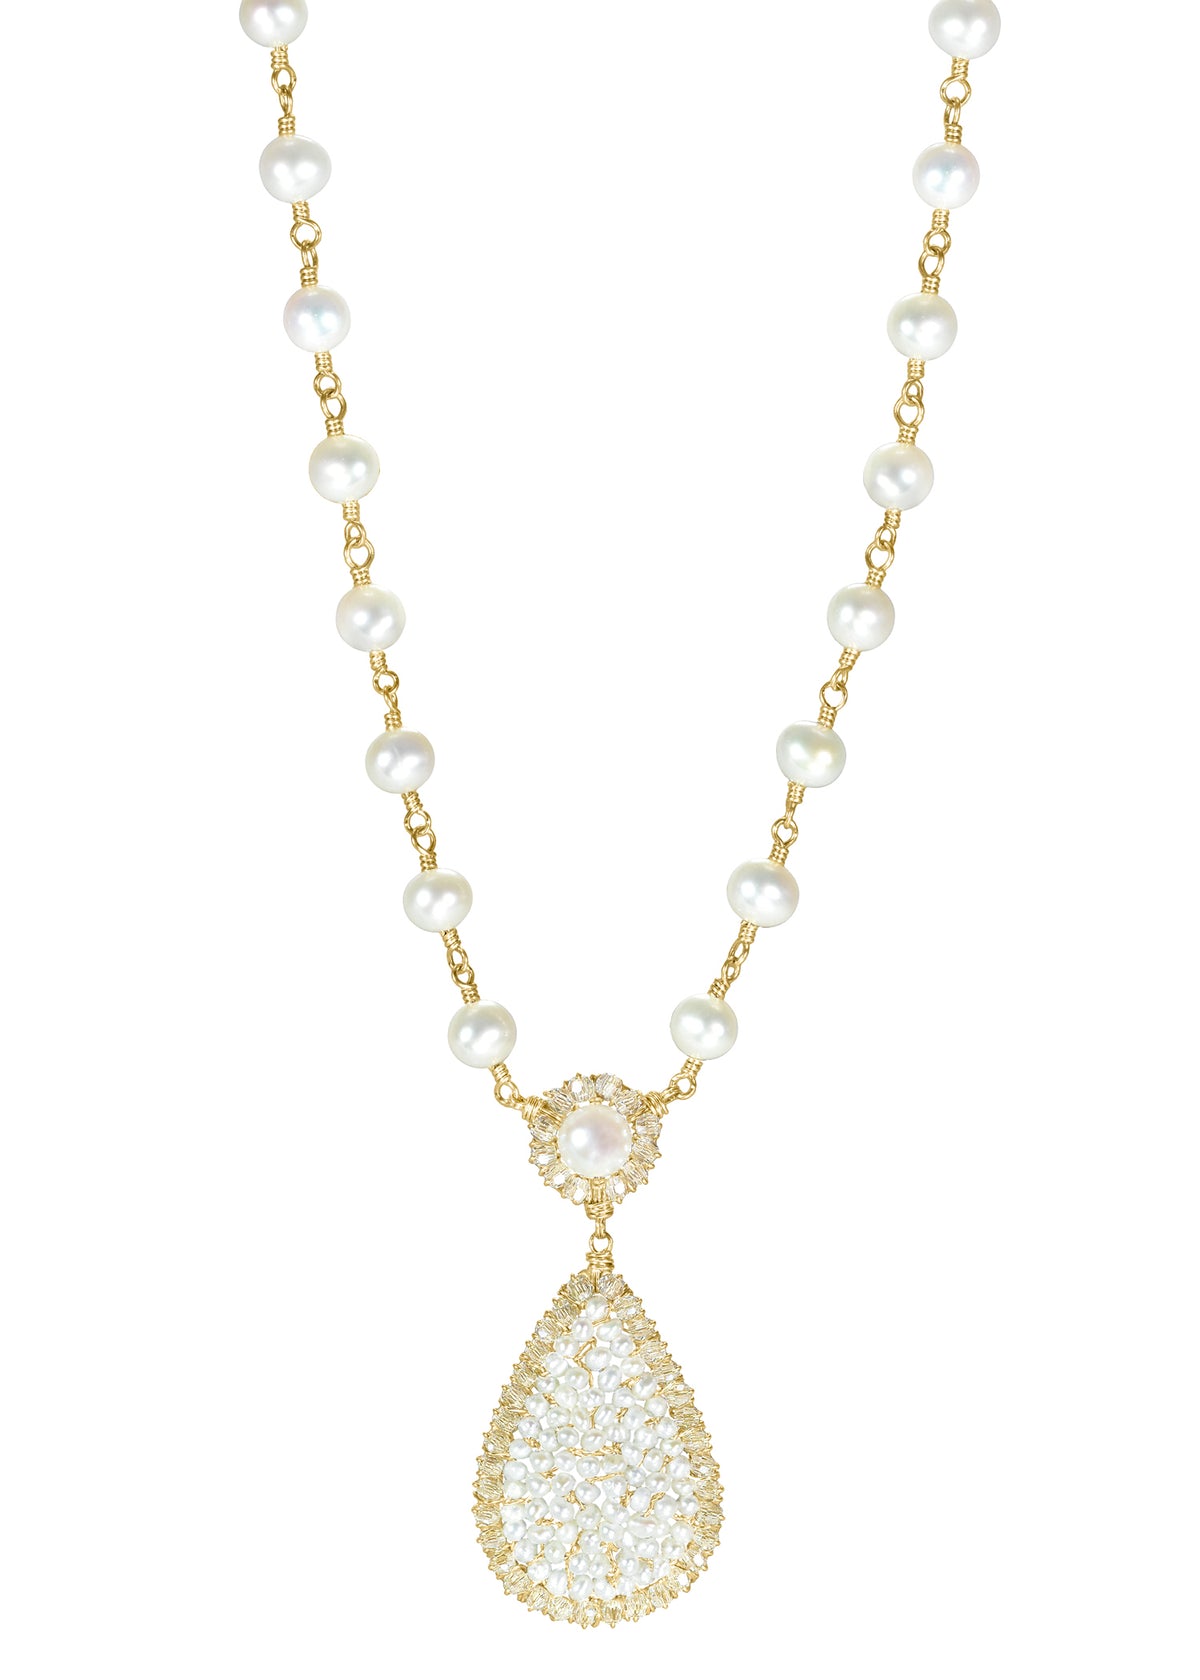 Crystal Freshwater pearl 14k gold fill Necklace measures 18&quot; (including a 2&quot; extender) Pendant measures 1-5/8&quot; in length and 11/16&quot; in width at the widest point Handmade in our Los Angeles studio